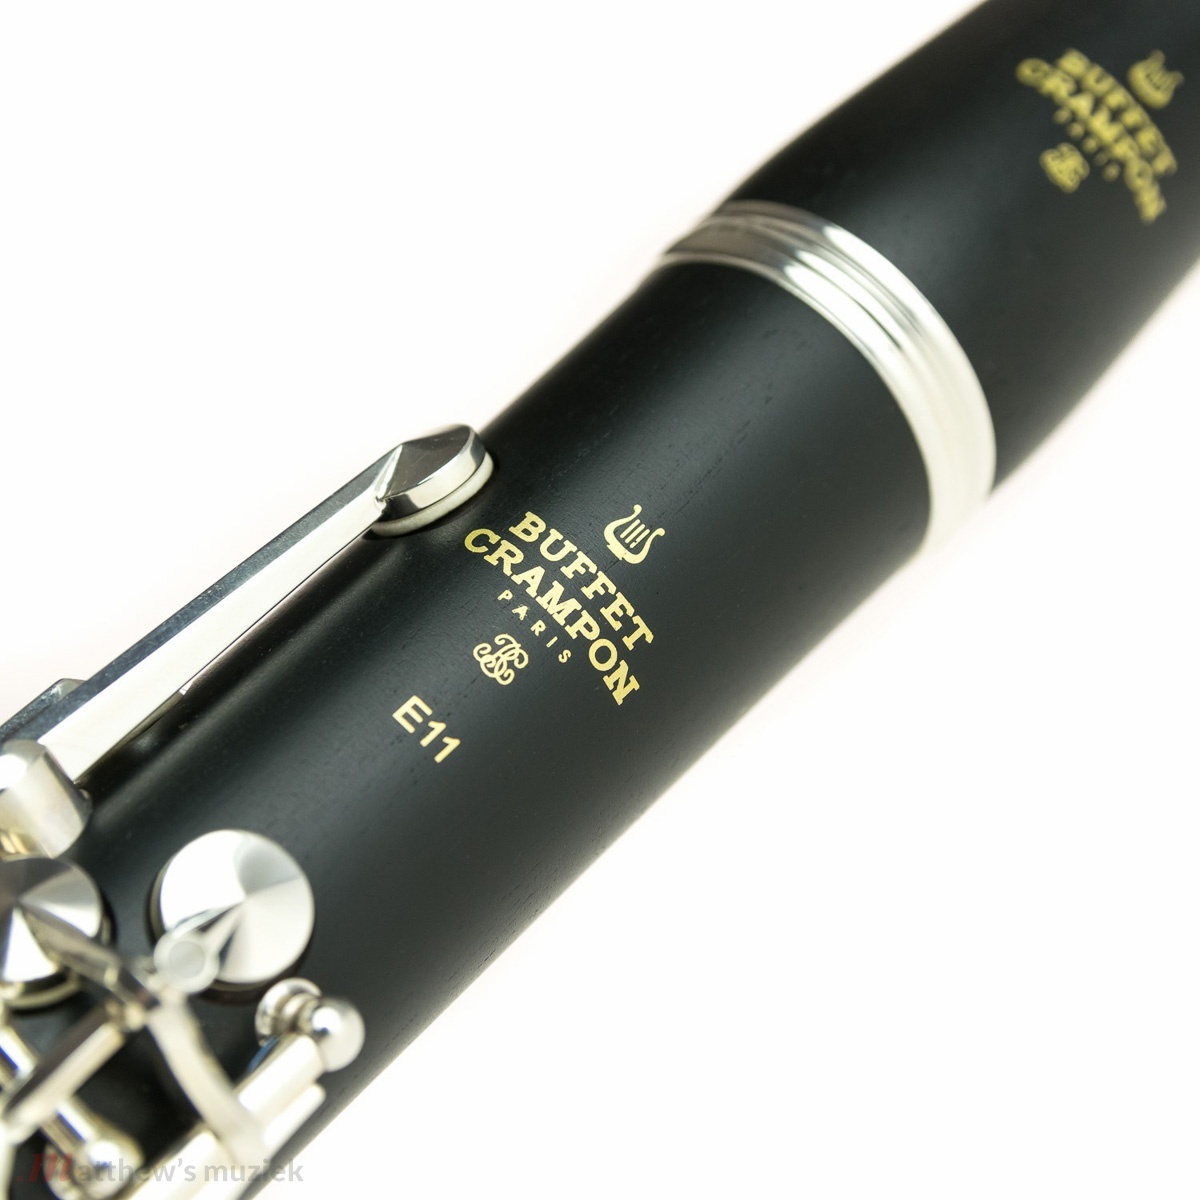 Buffet Crampon Bb Clarinet - E11 with Silver Plated Keys